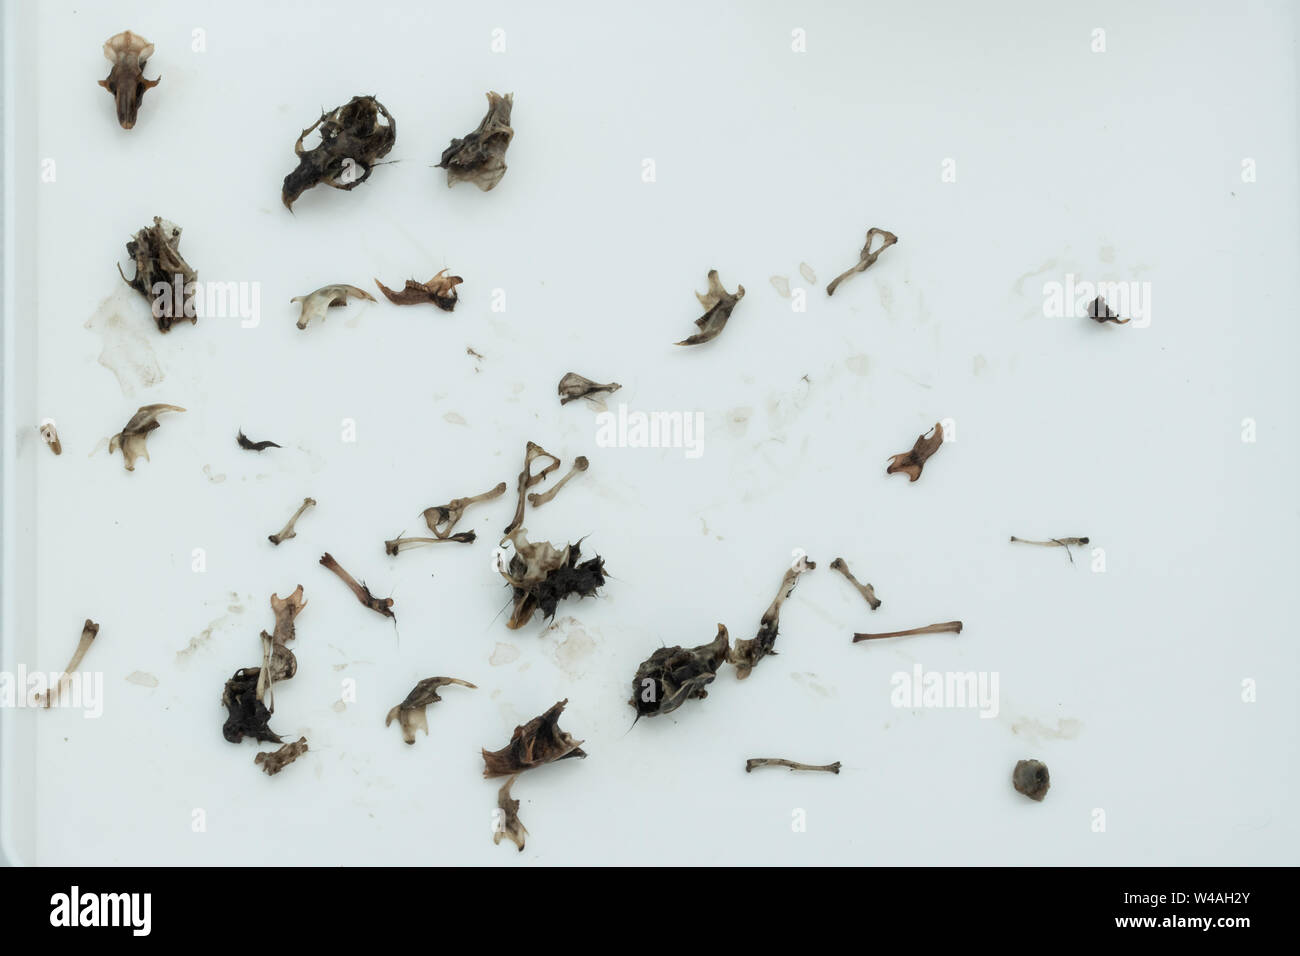 Collection of small mammal bones including skulls from dissecting a barn owl pellet, showing the indigestible remains of the bird's prey. Stock Photo